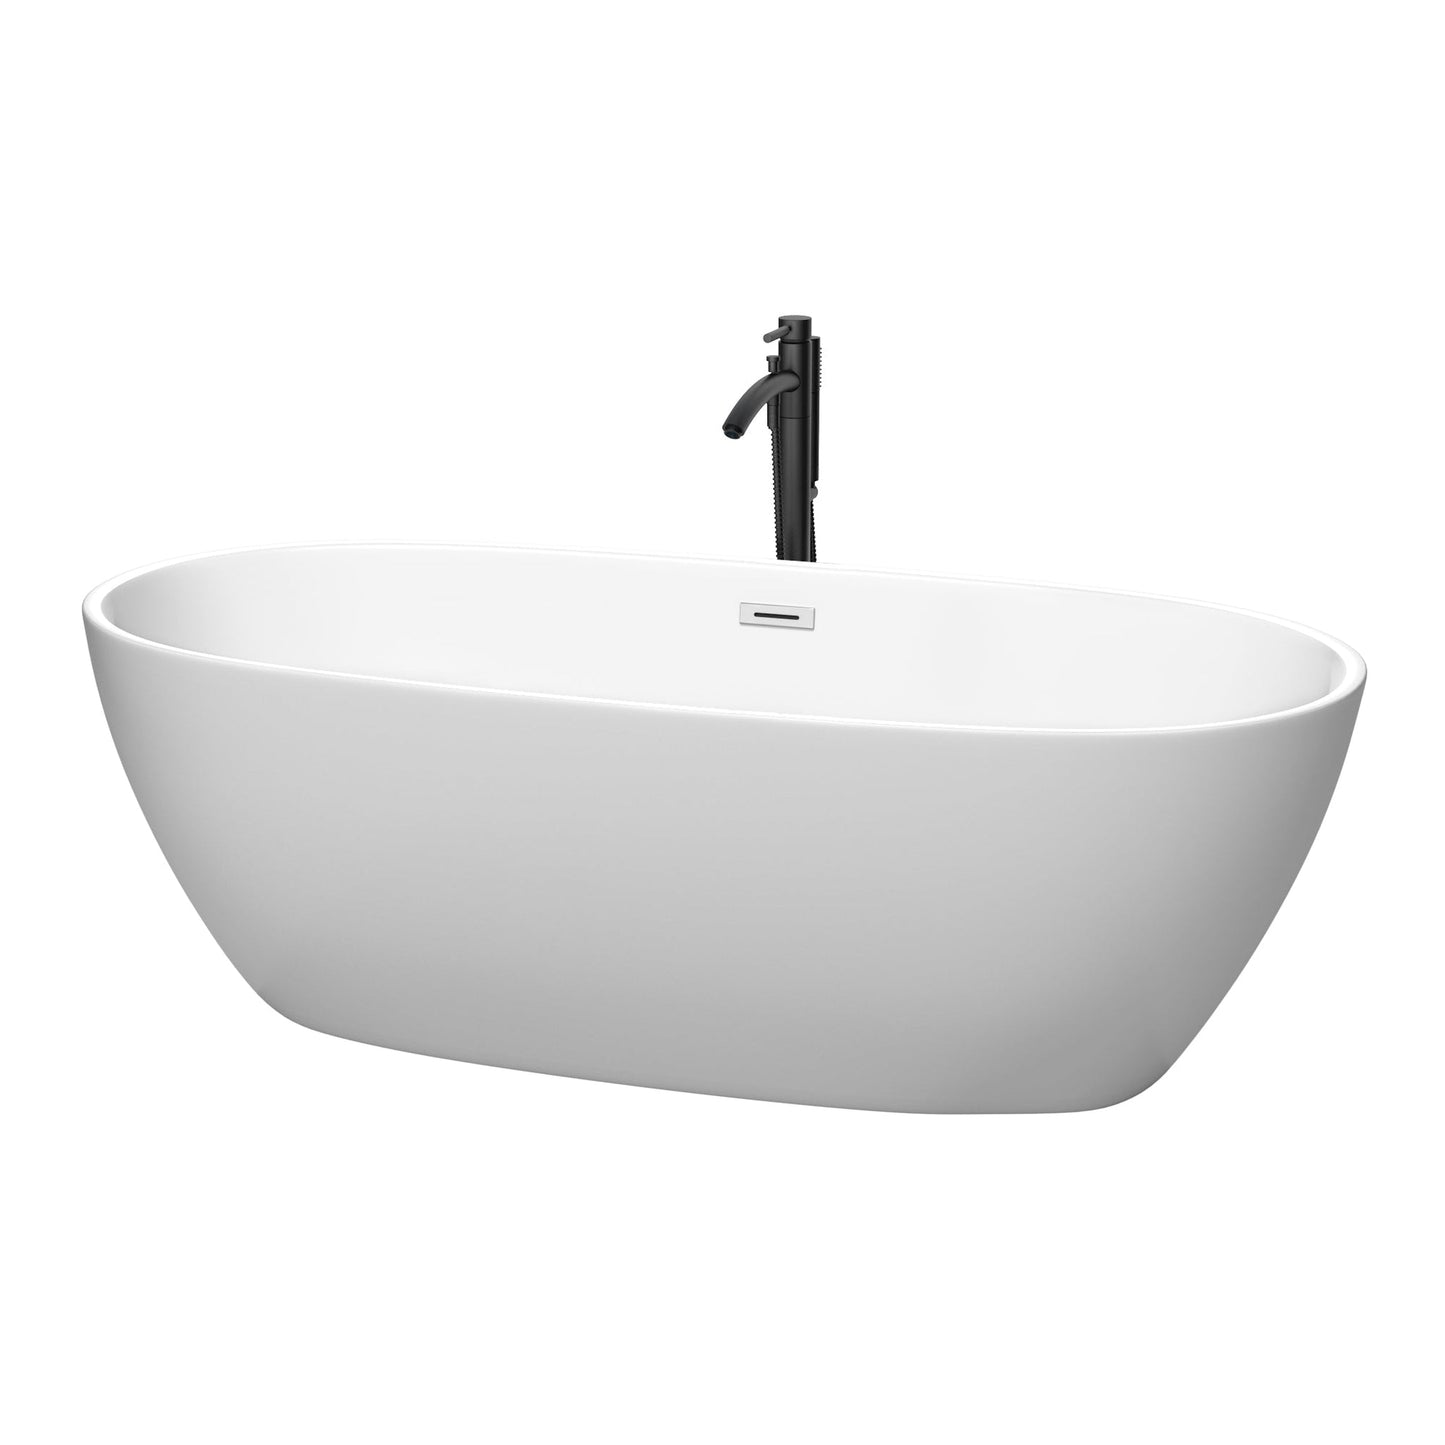 Wyndham Collection Juno 71" Freestanding Bathtub in Matte White With Polished Chrome Trim and Floor Mounted Faucet in Matte Black